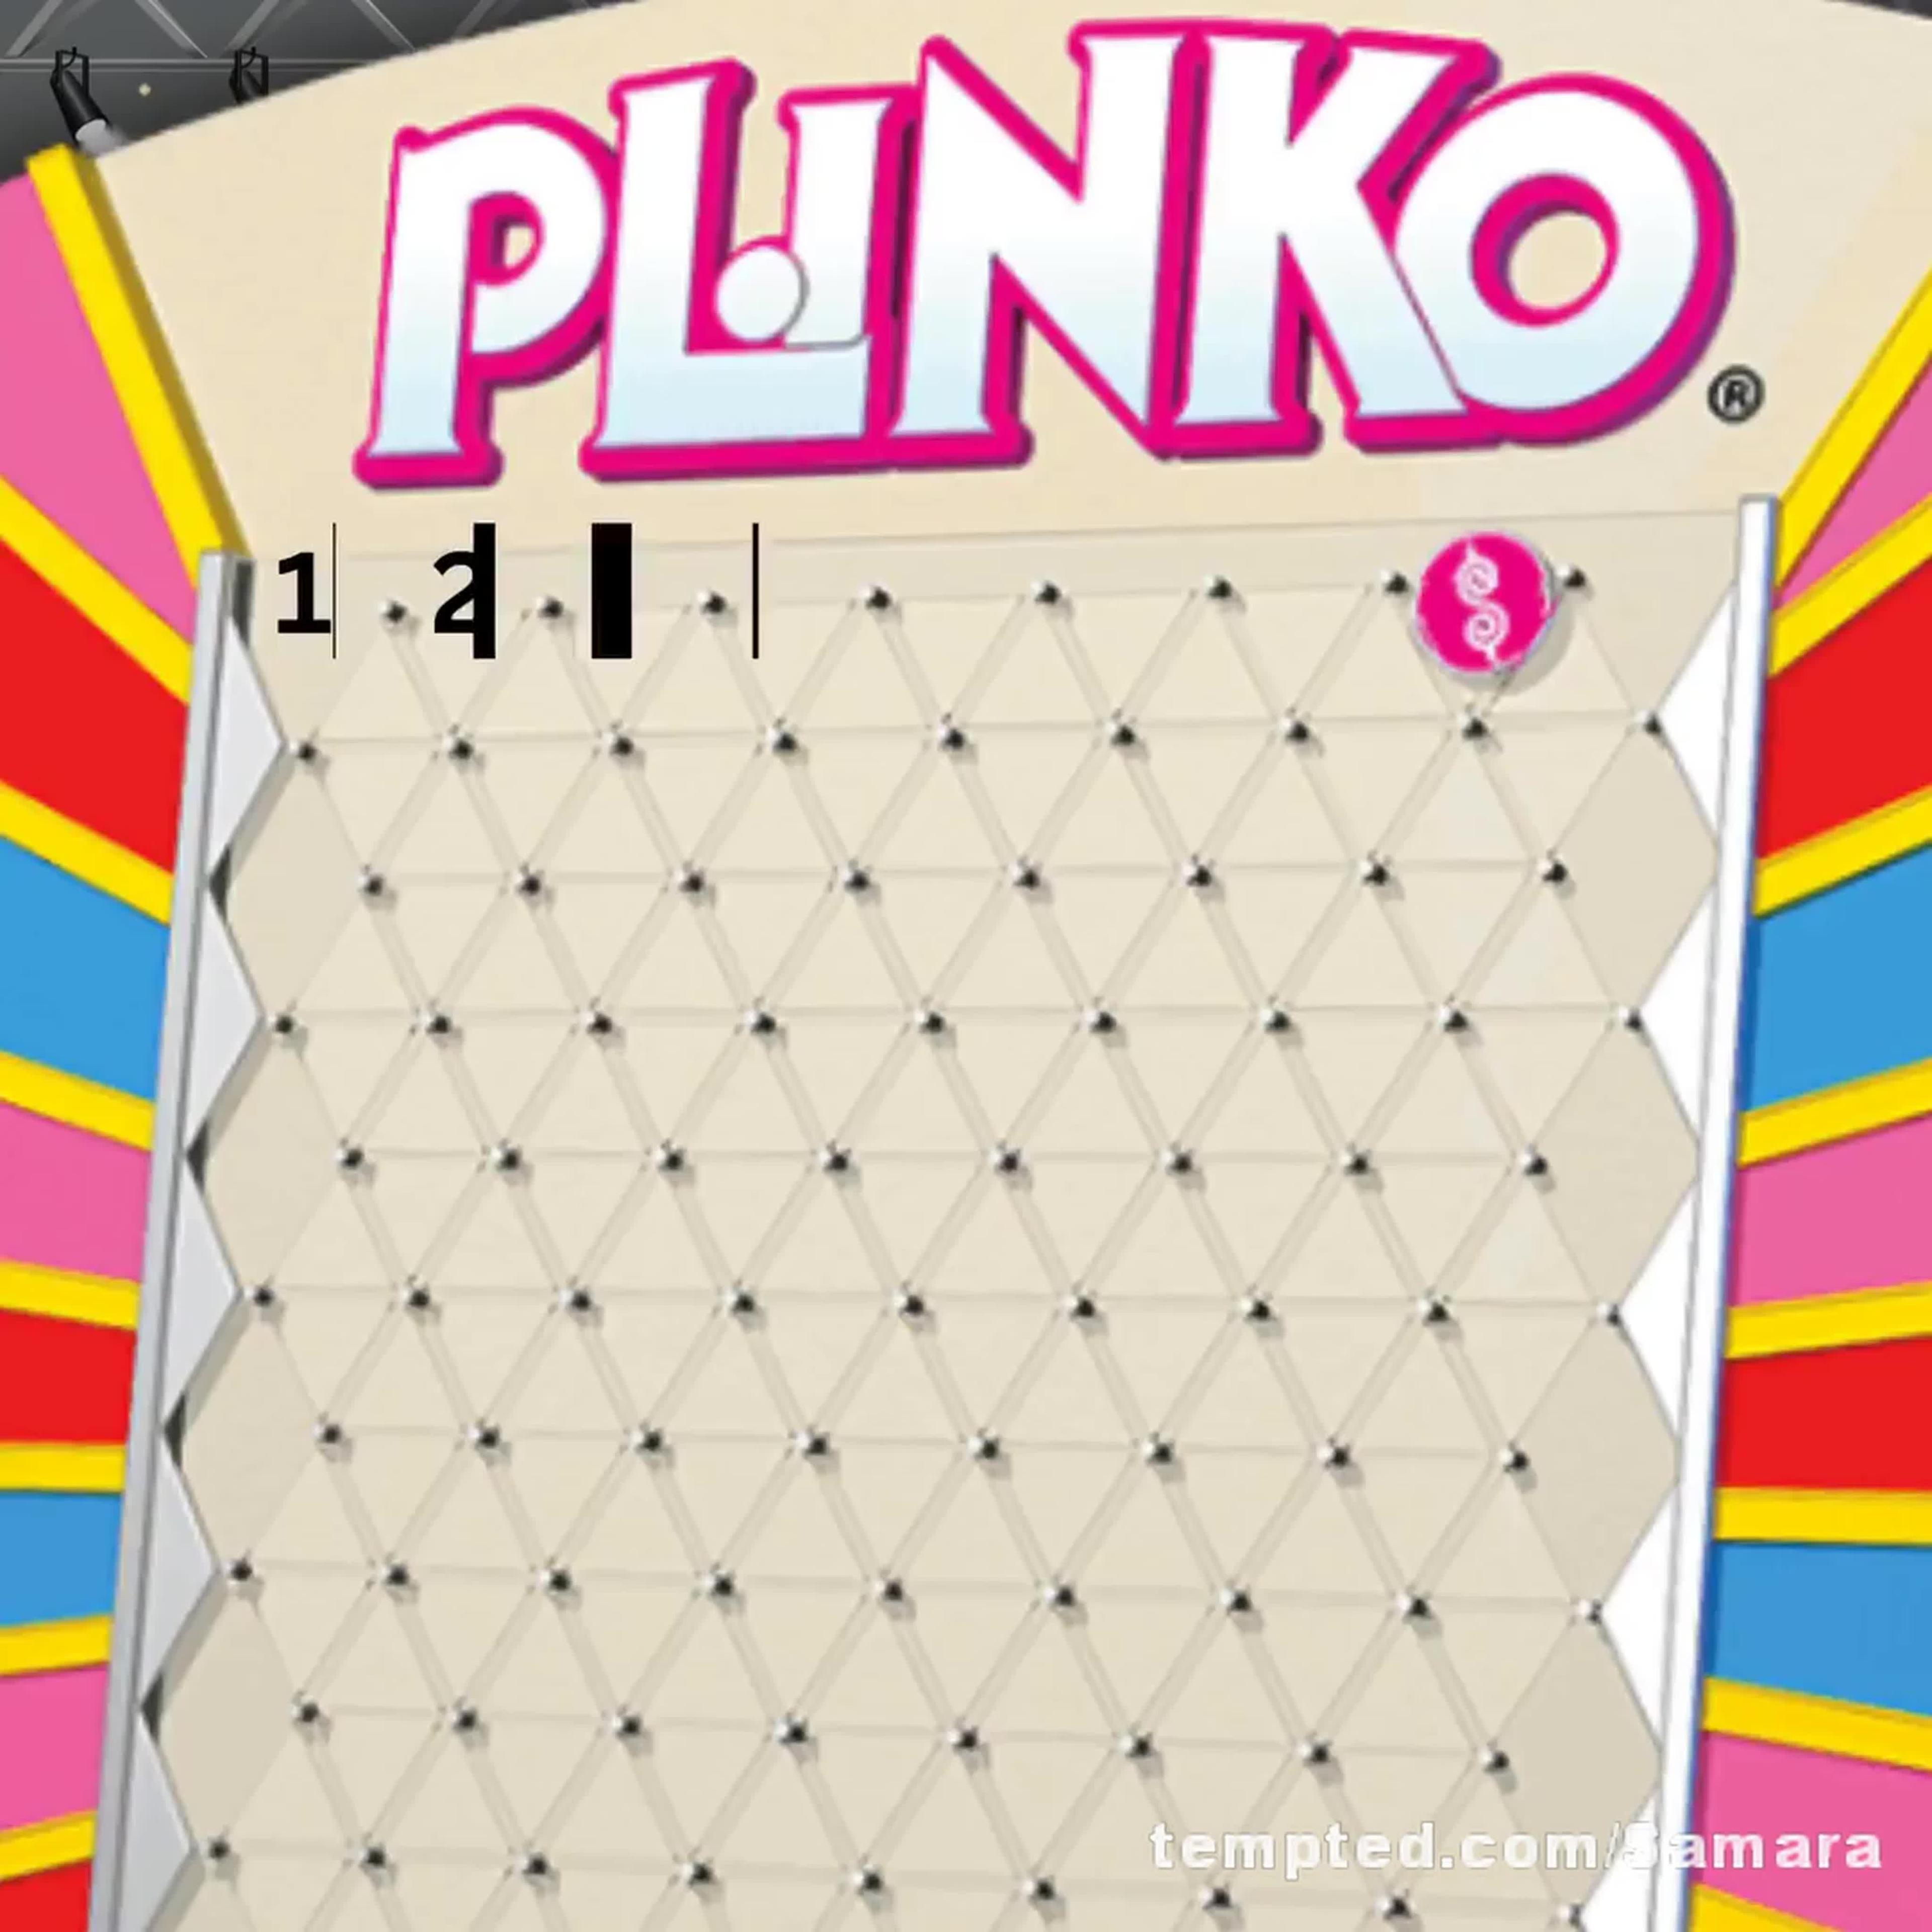 PLINKO Who doesn't love playing Plinko?!? 🙌 Let's play and you could win an amazing prize! Simply choose where to 🫳 drop the puck (1-9) and let's see where it lands! Tip $25 and WIN, you can't lose!!💋